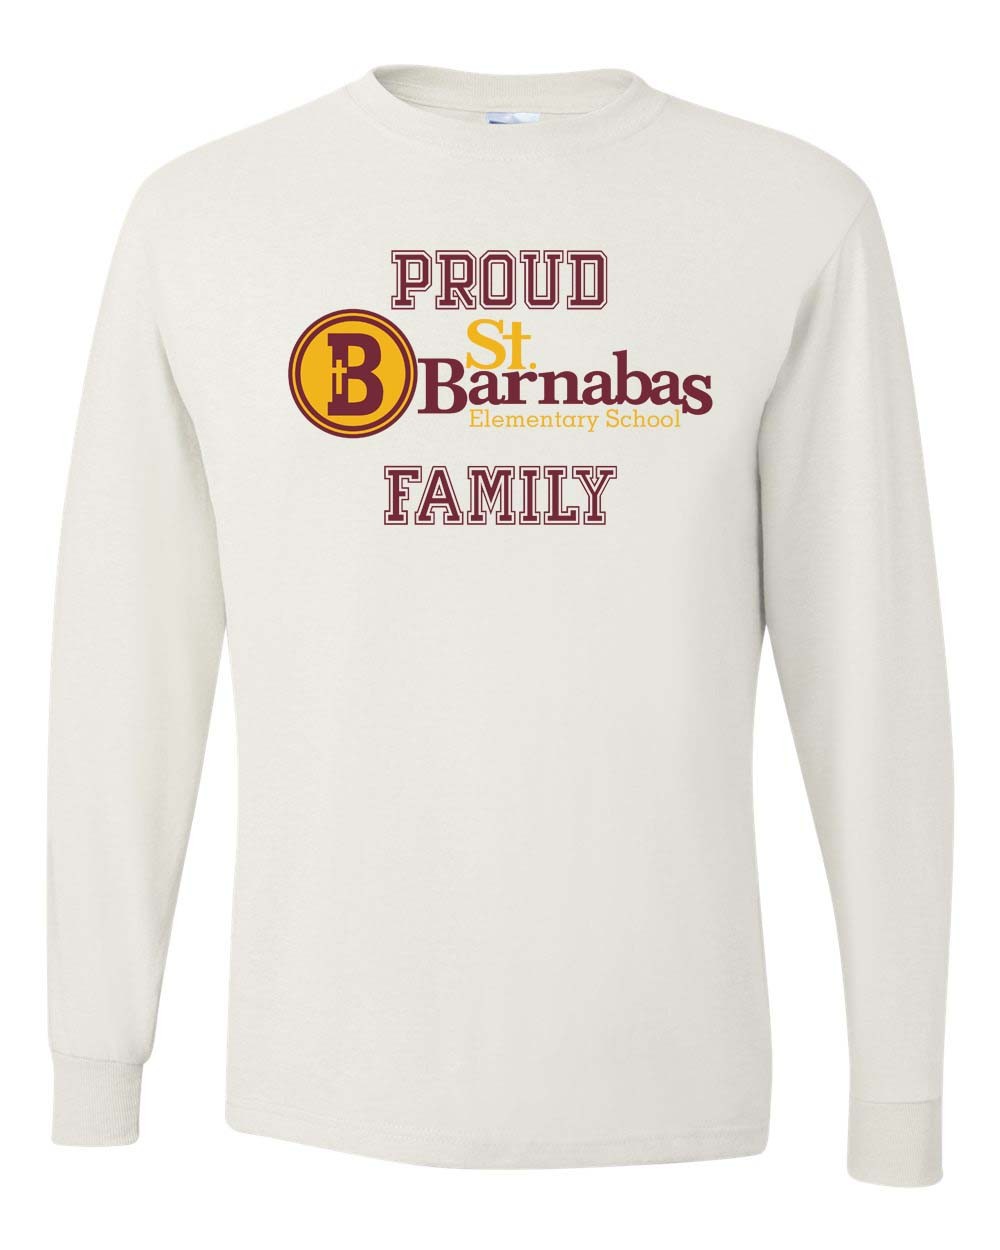 SBS Spirit L/S T-Shirt w/ Proud Family Logo - Please Allow 2-3 Weeks for Delivery 